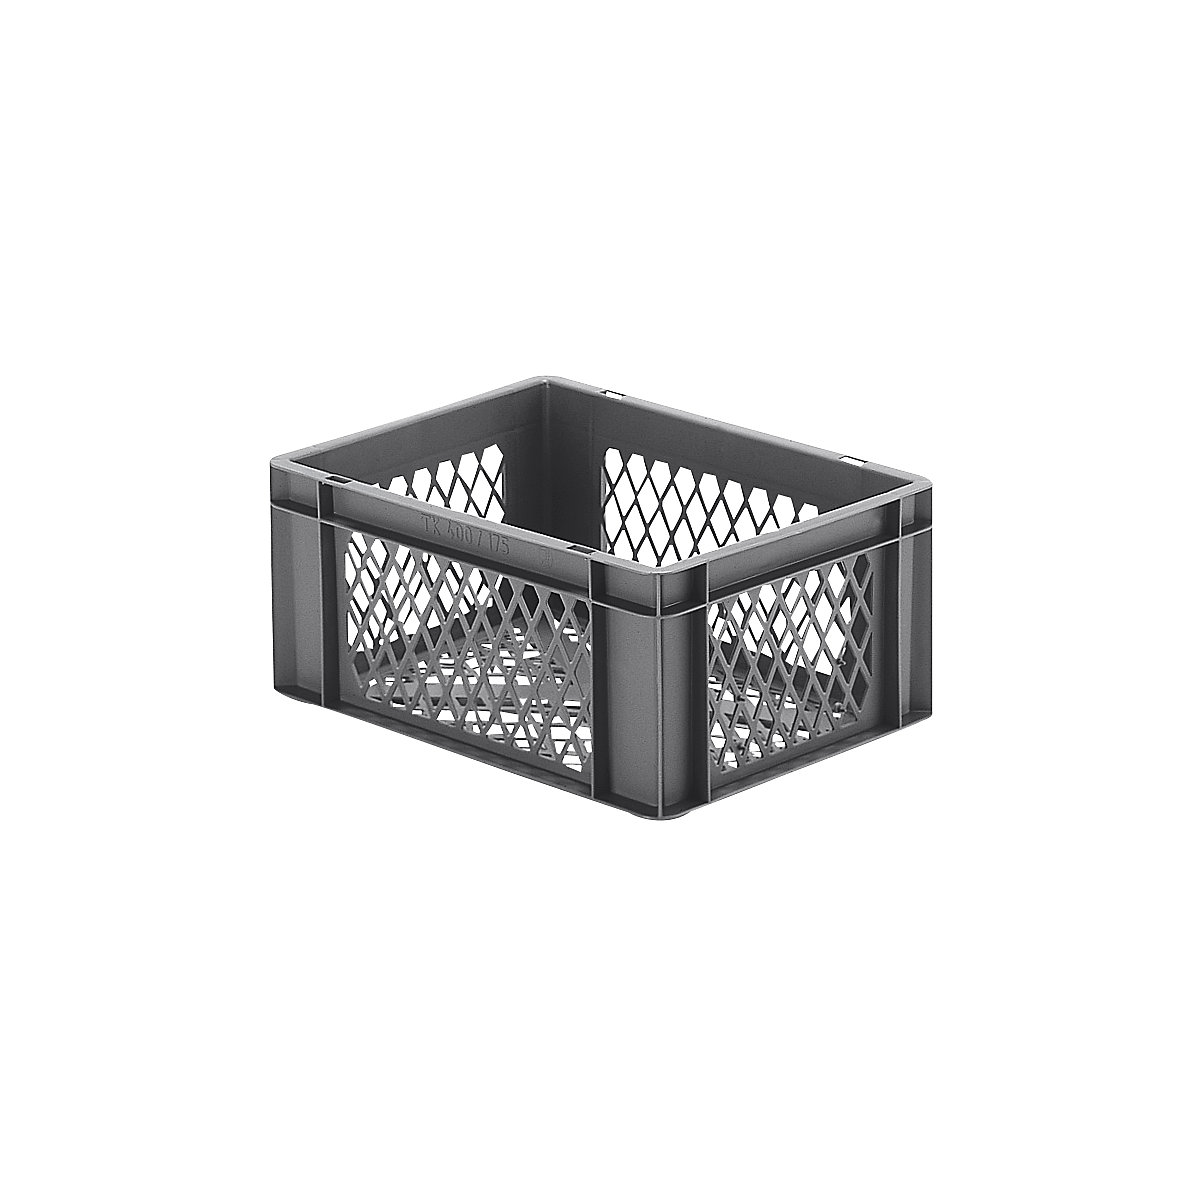 Euro stacking container, perforated walls and base, LxWxH 400 x 300 x 175 mm, grey, pack of 5